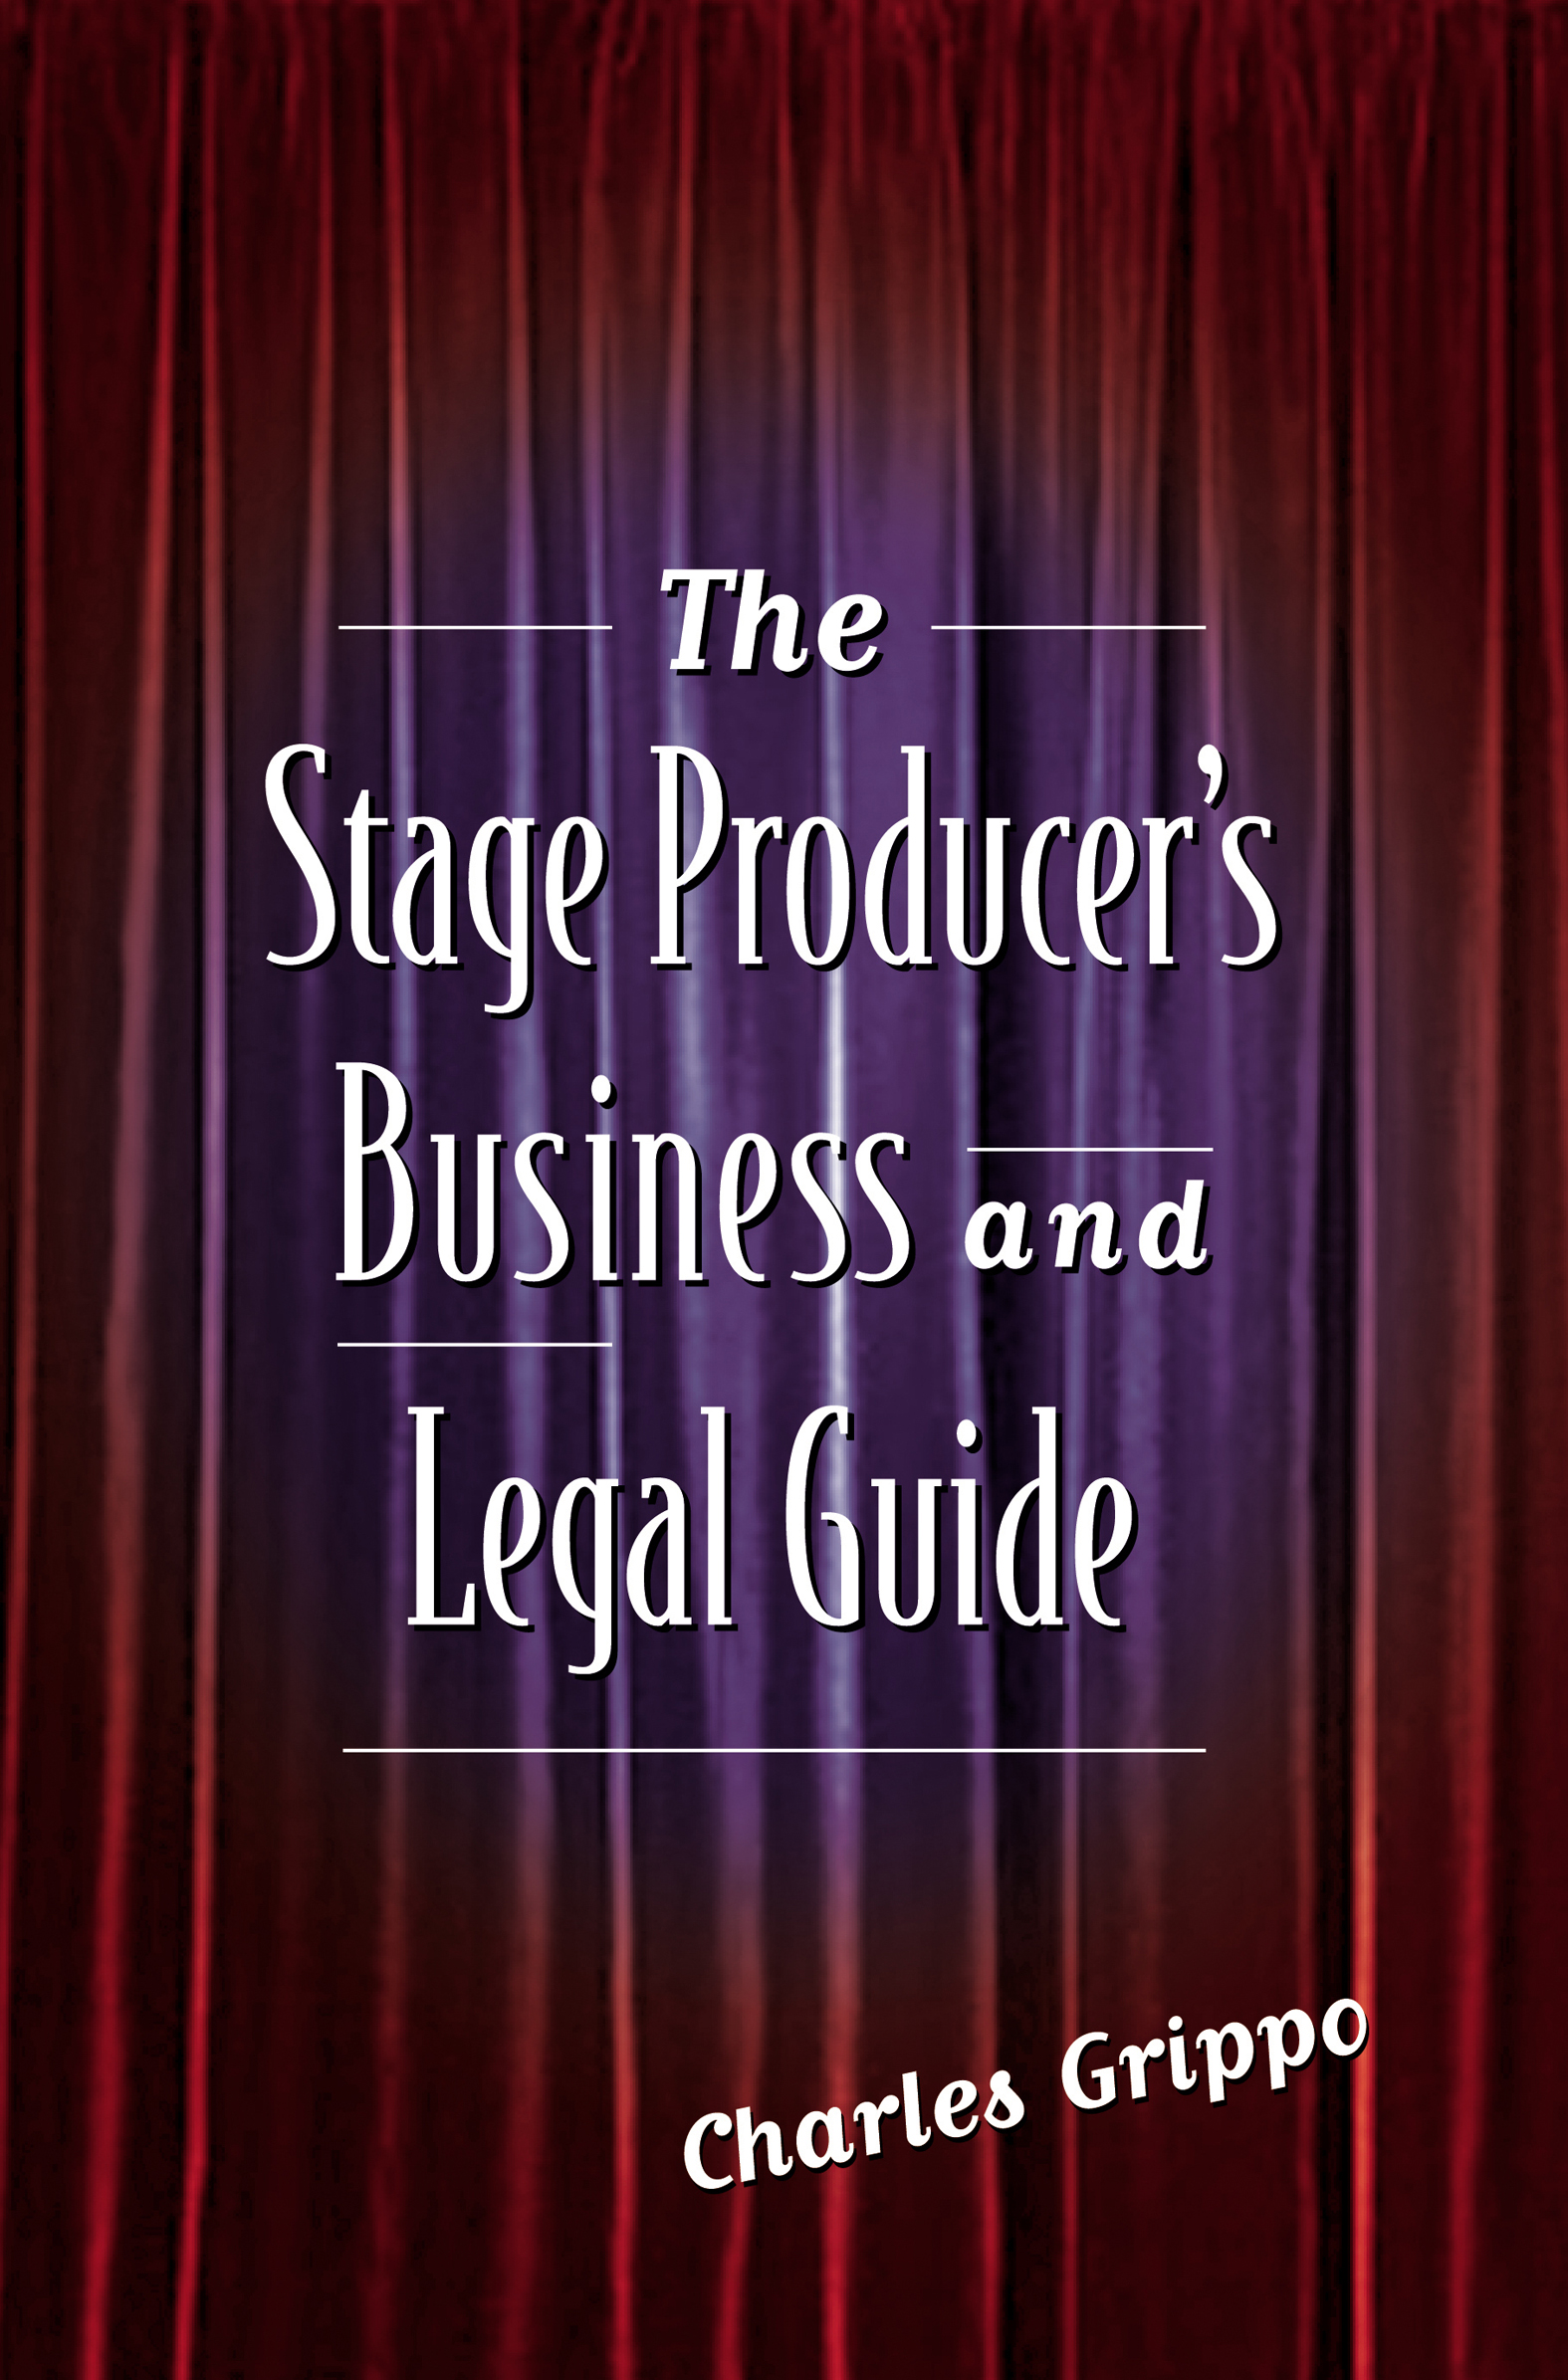 The Stage Producer's Business and Legal Guide - 15-24.99